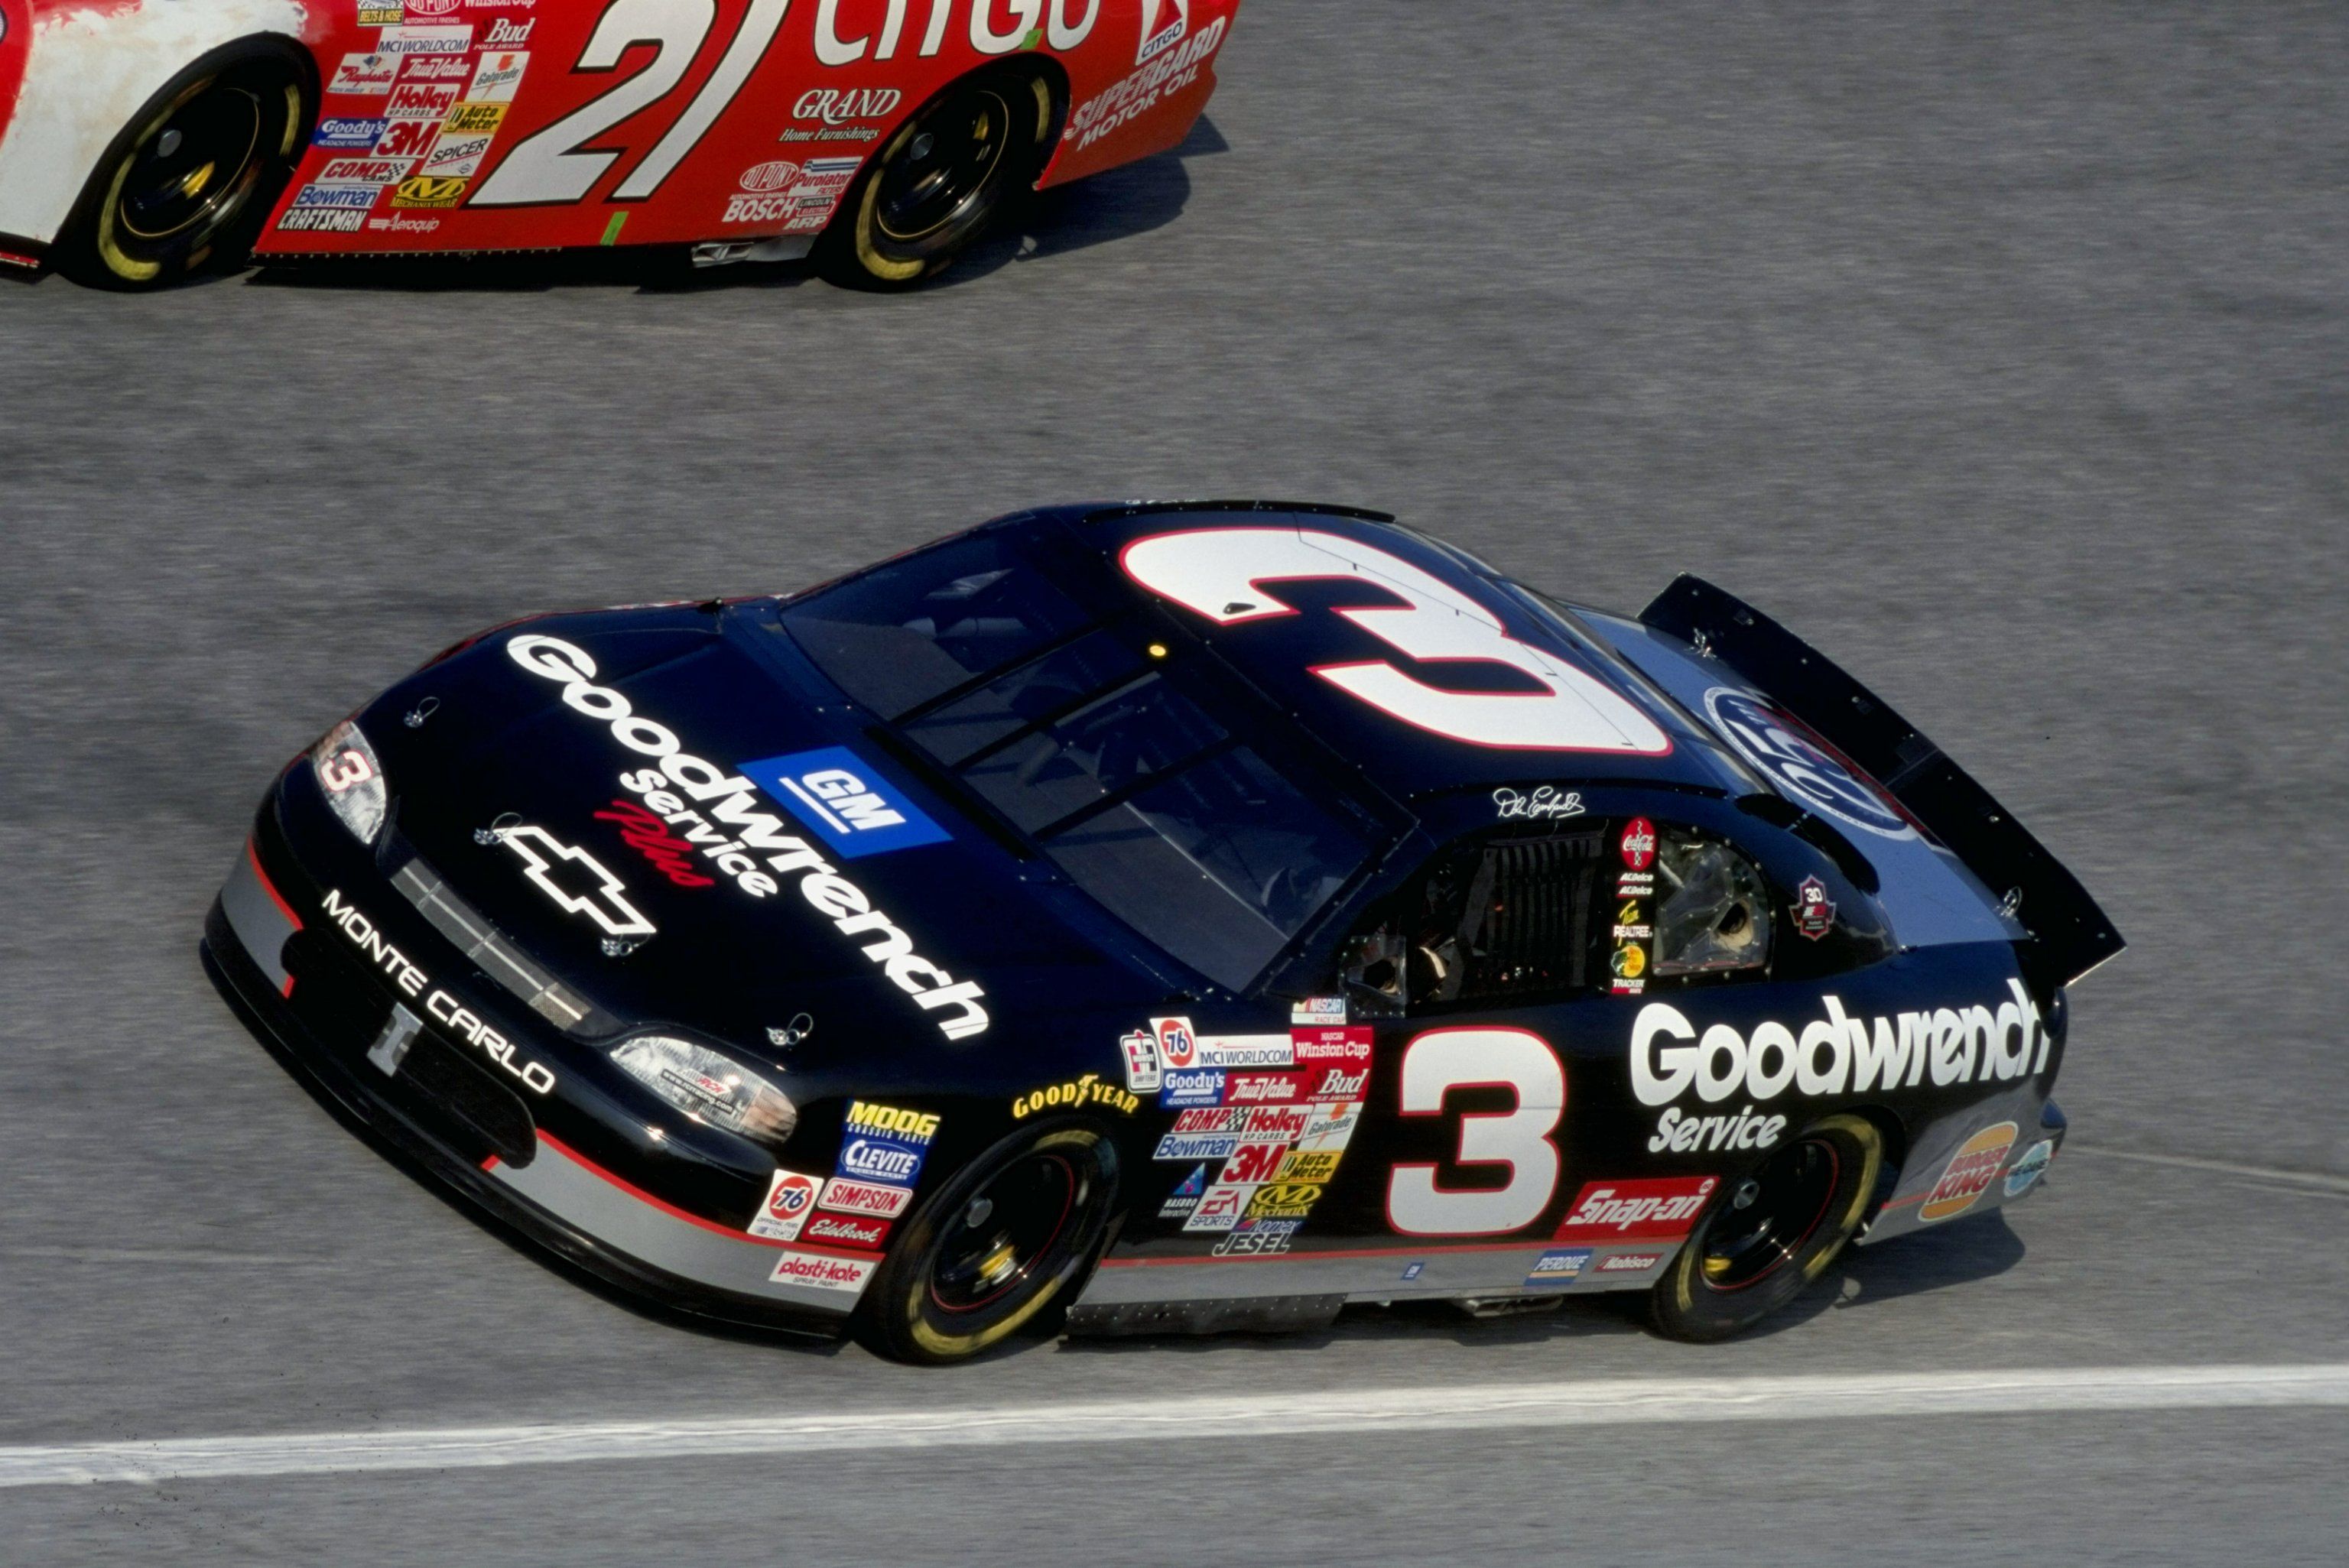 Earnhardt to Drive the Famous No. 3 for Richard Childress Racing